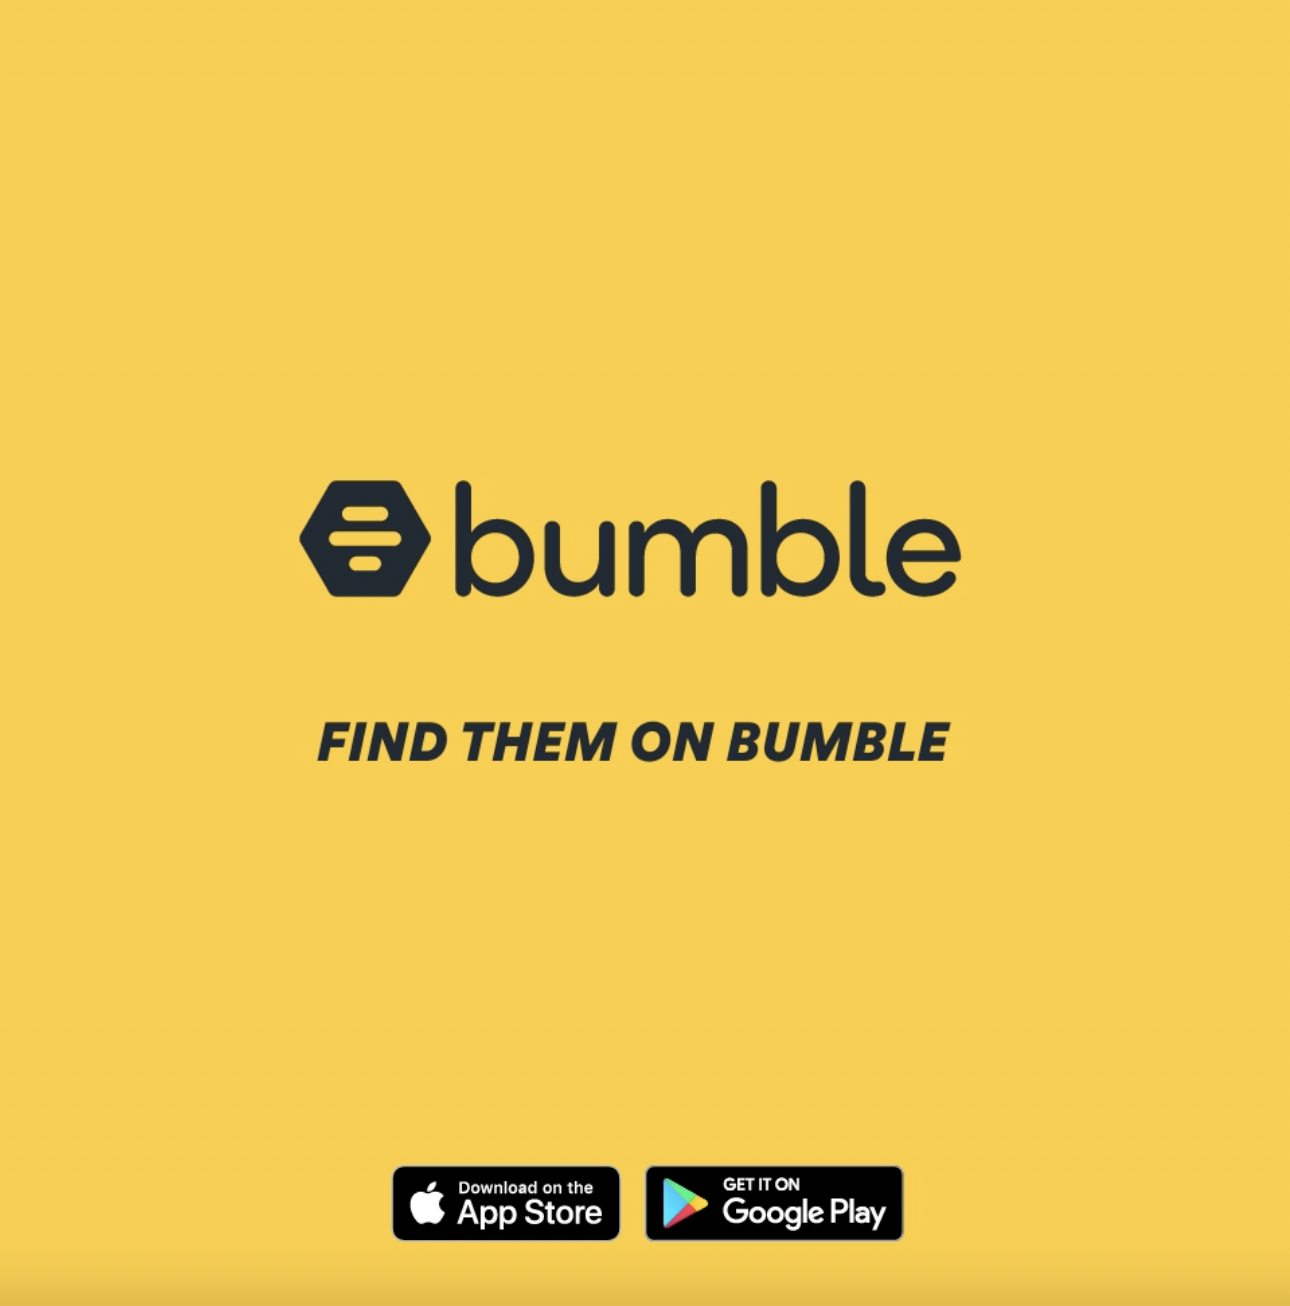 bumble | 'find them on bumble'